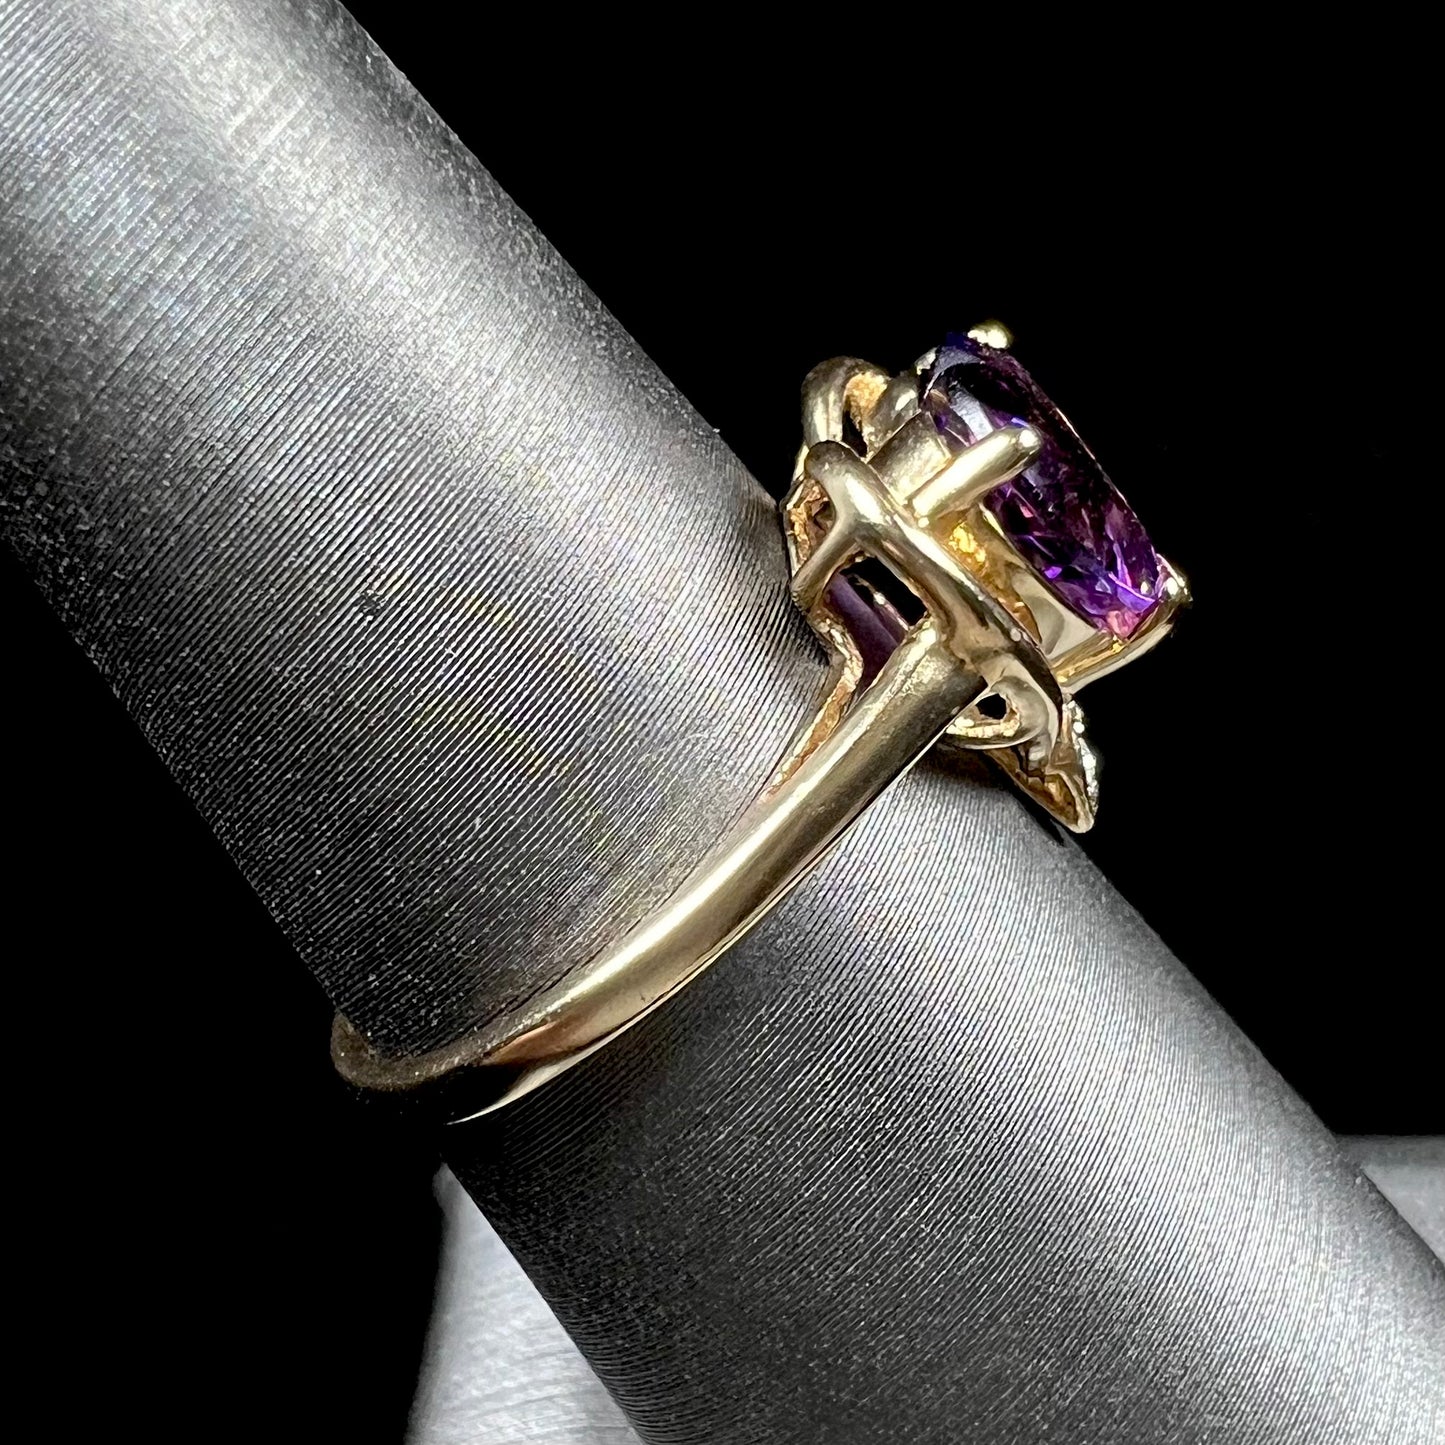 A ladies' yellow gold ring set with a heart shaped amethyst and round cut diamond accents.